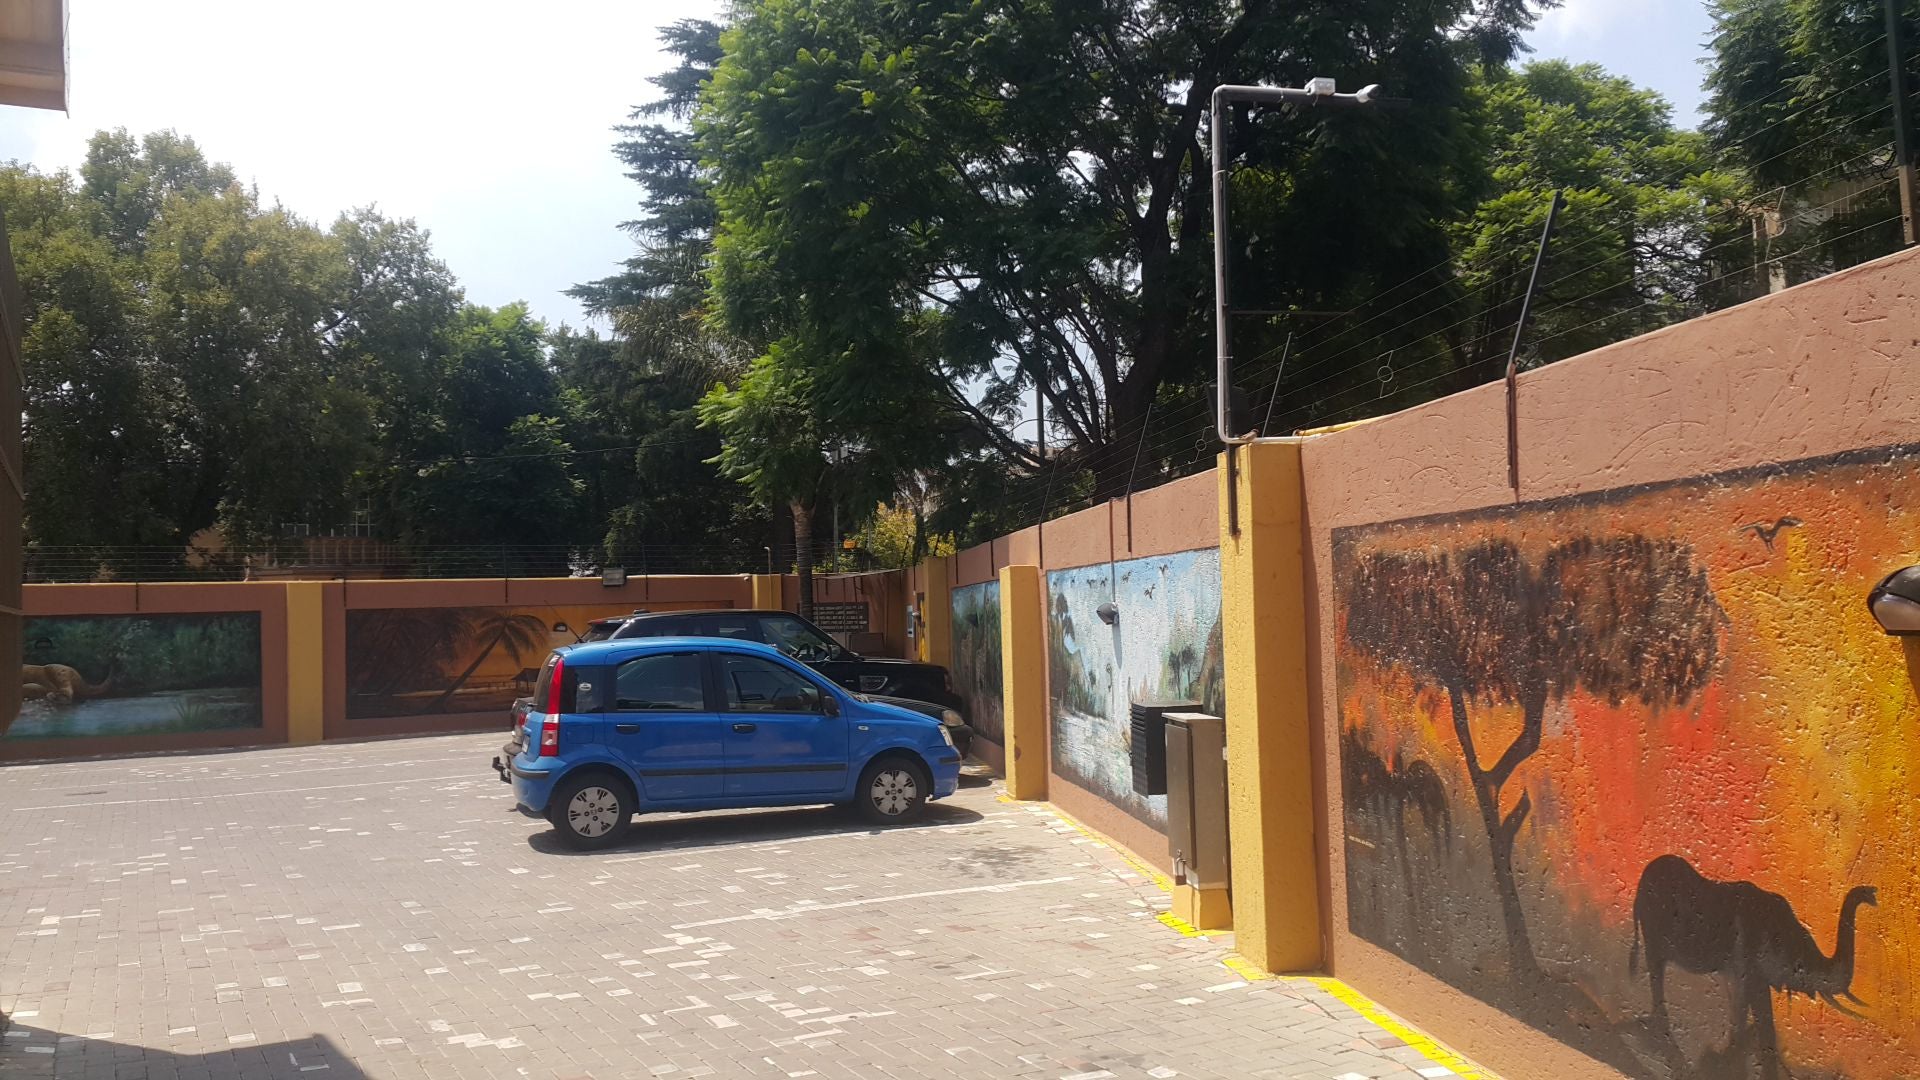 Chisam Guest Lodge Yeoville Johannesburg Gauteng South Africa Wall, Architecture, Art Gallery, Art, Painting, Street, Car, Vehicle